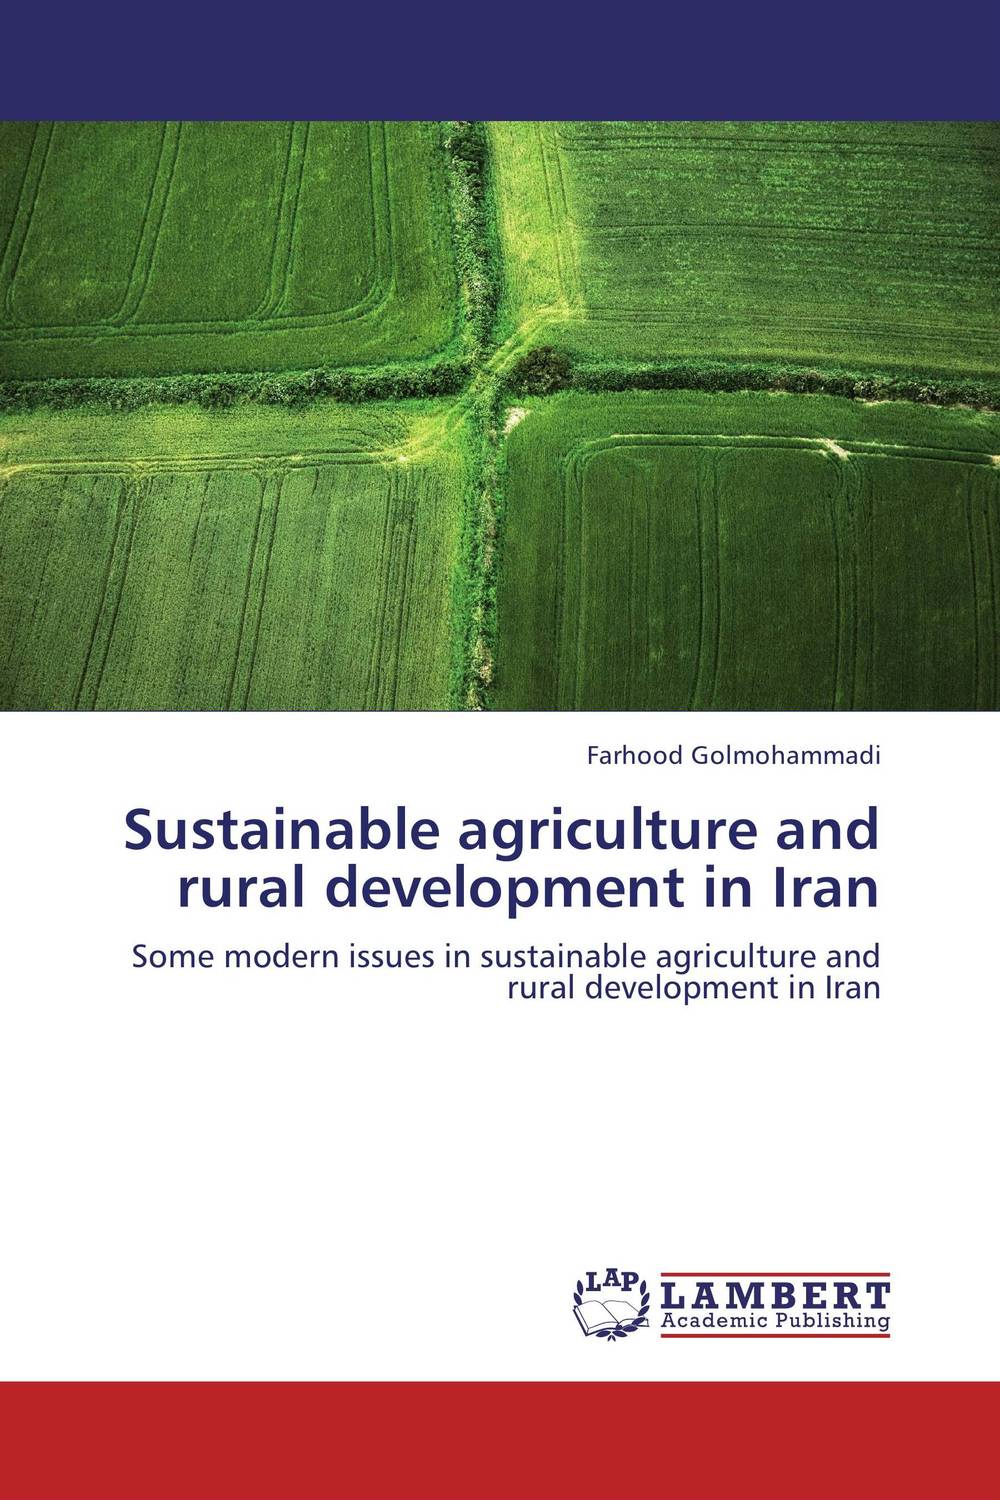 Sustainable agriculture and rural development in Iran